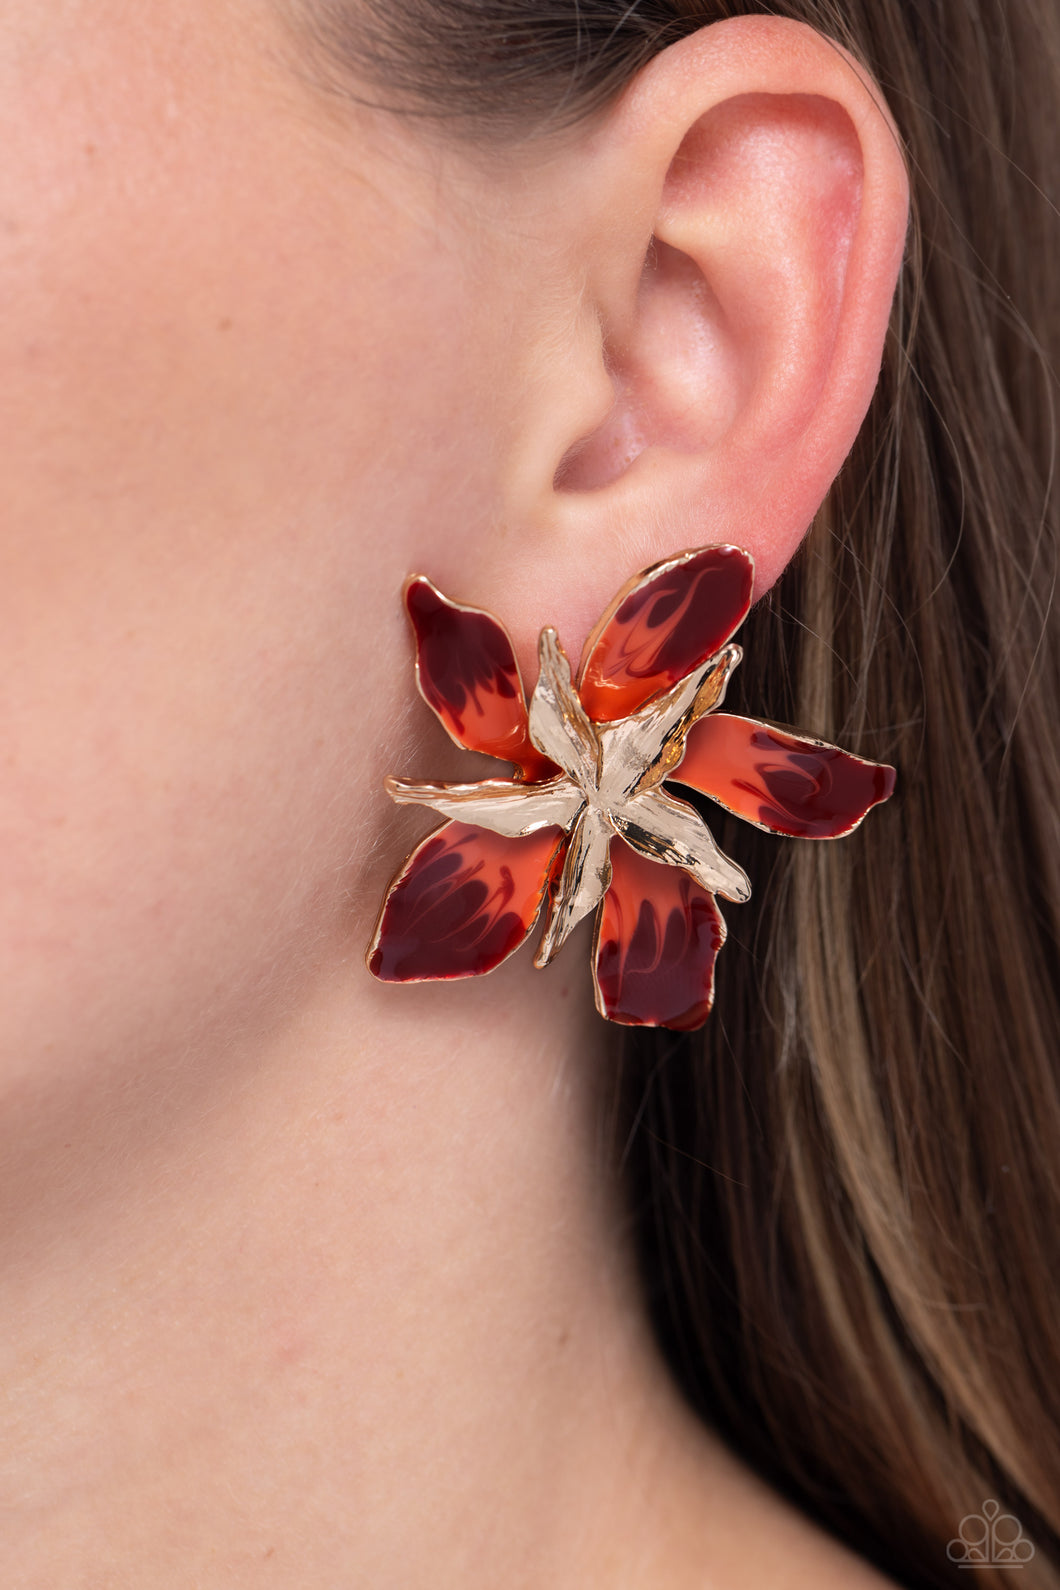 Featuring a warped, metallic texture, a gold flower blooms atop the ear, while a larger gold warped flower featuring Red Dahlia and Burnt Sienna accents adds a vibrant pop of color to the whimsical centerpiece. Earring attaches to a standard post fitting.  Sold as one pair of post earrings.